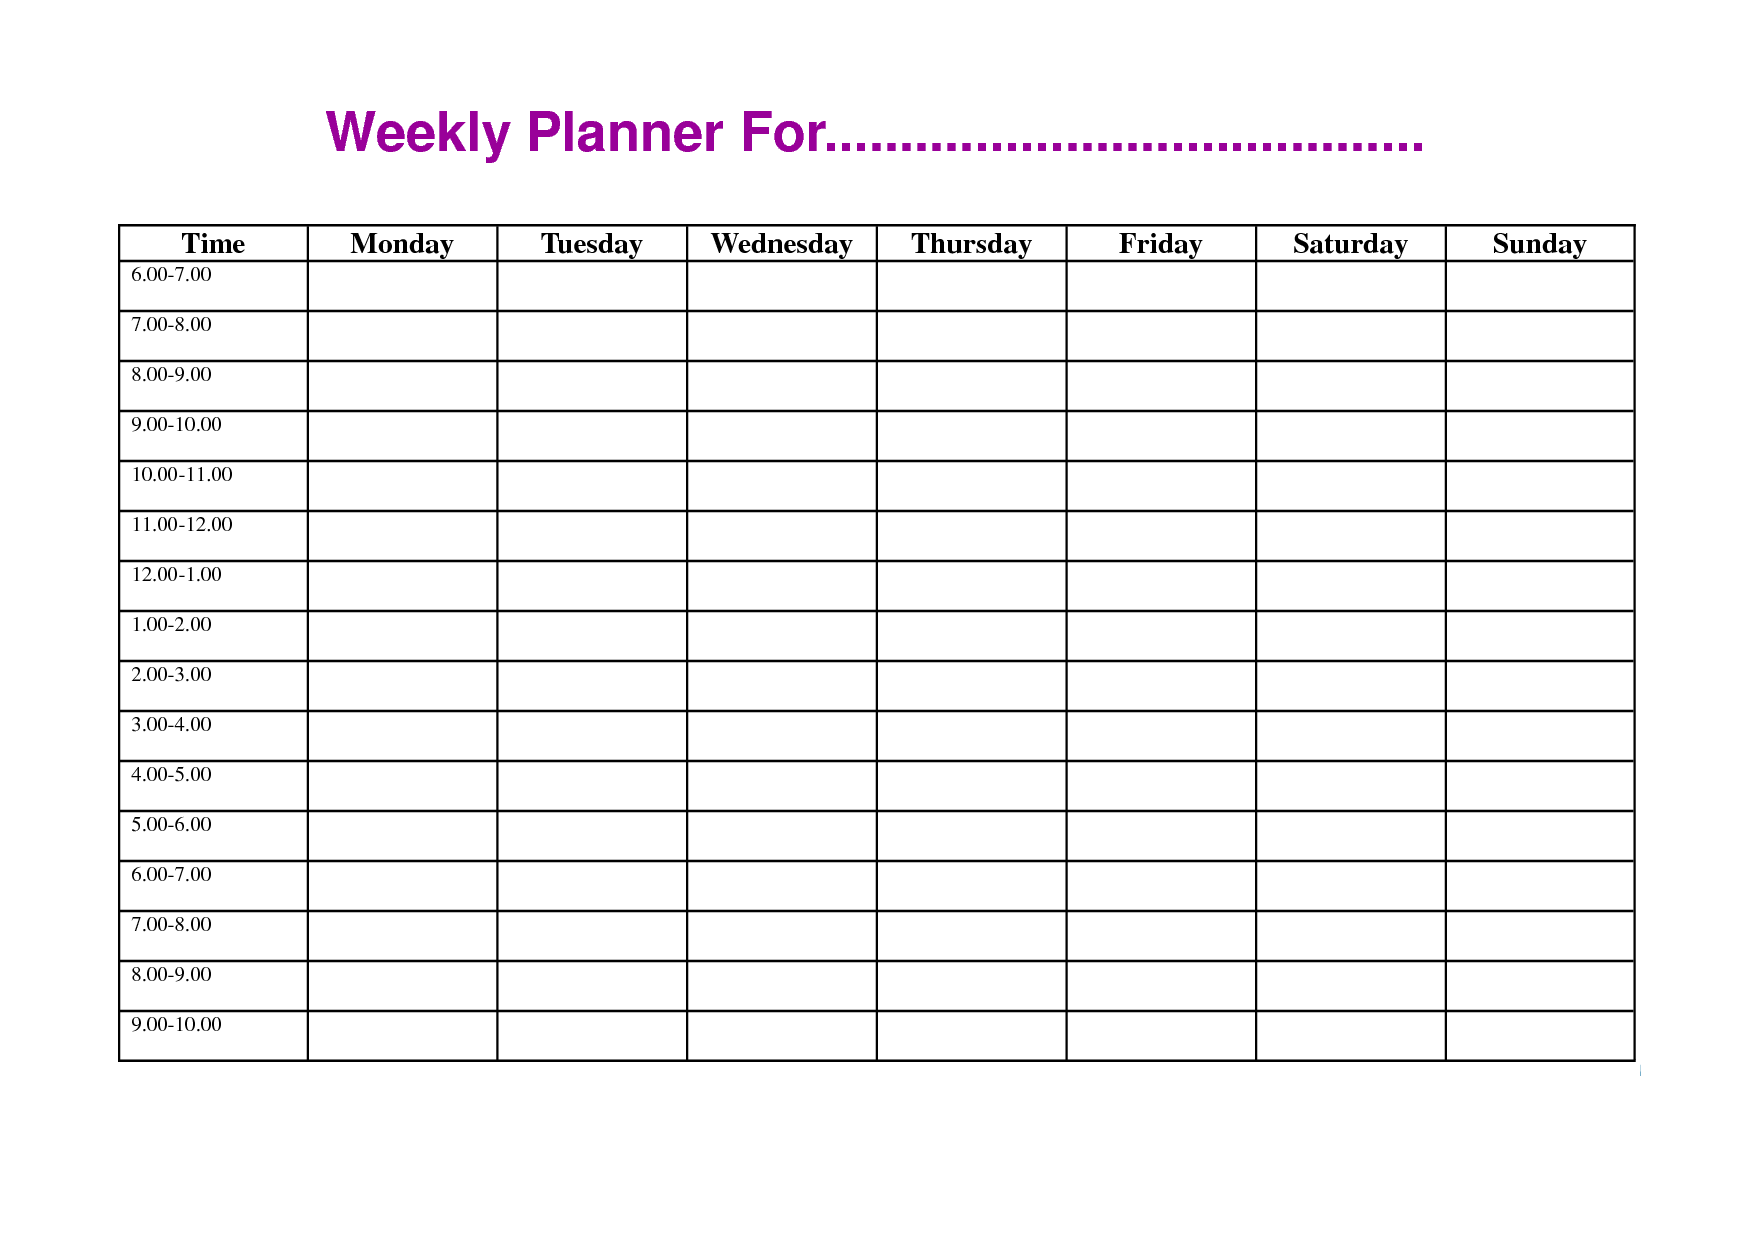 printable-weekly-schedule-with-times